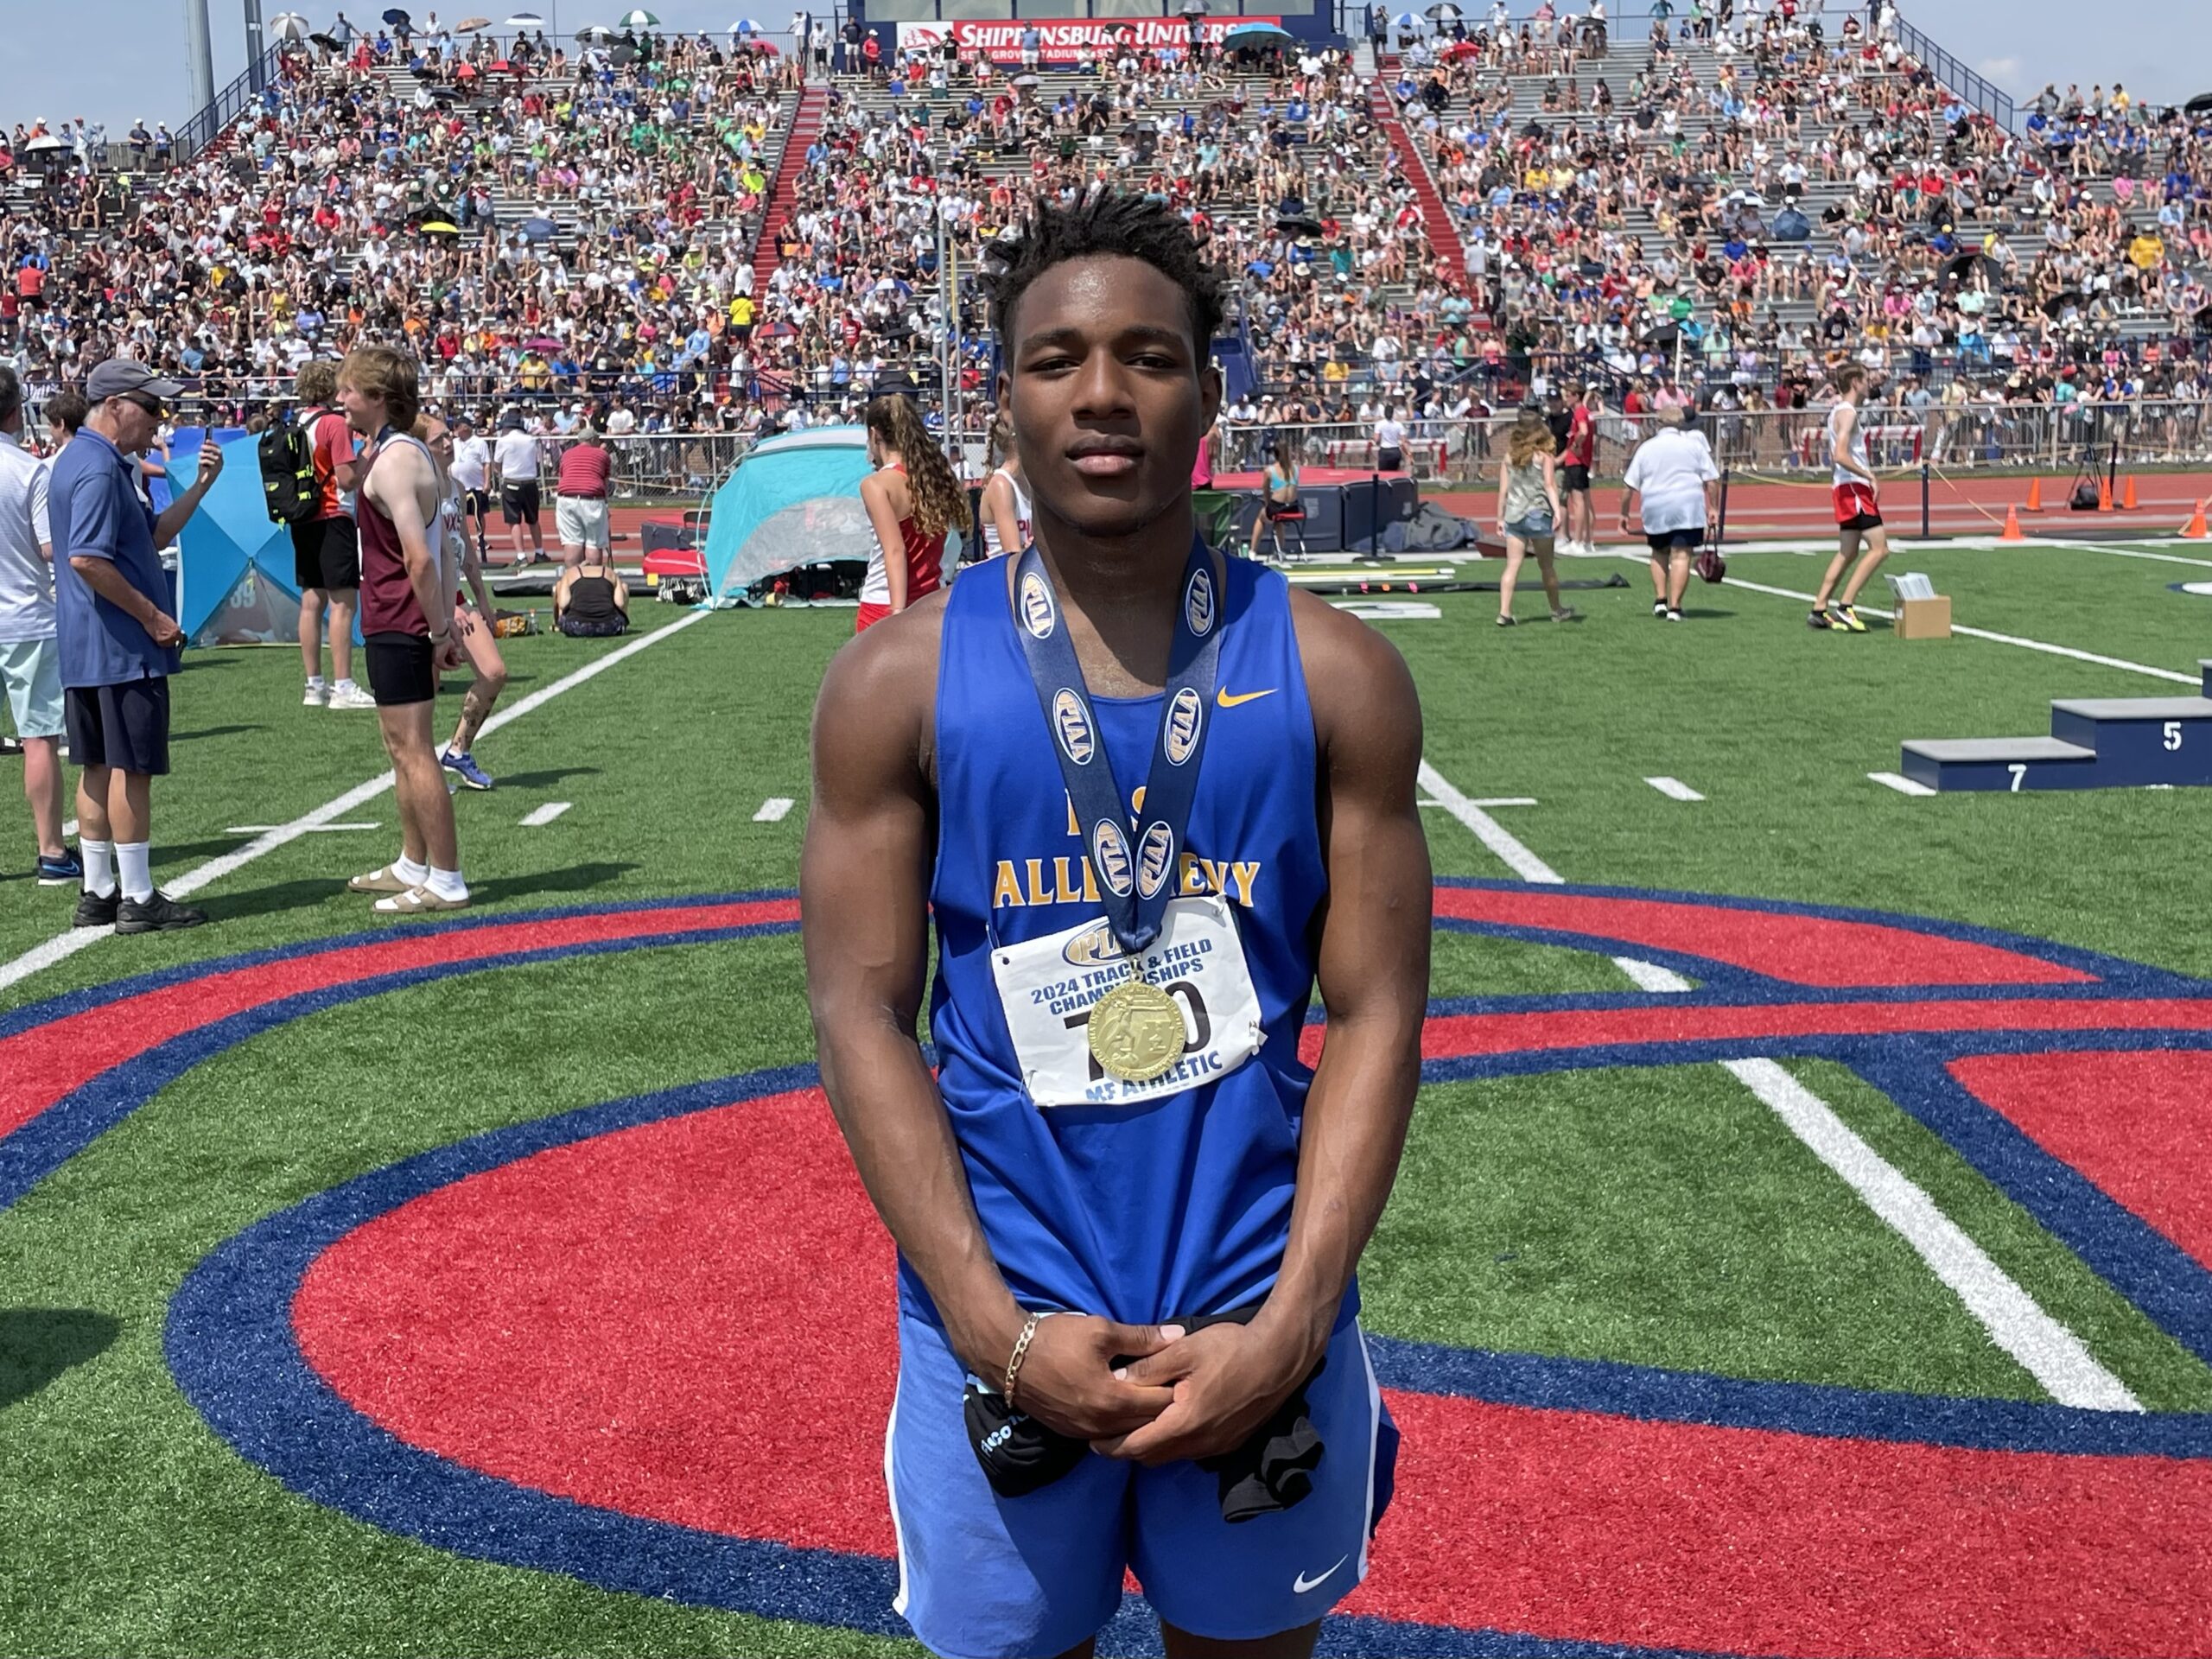 PIAA boys track and field championships: Not tall in height but also not short on talent, East Allegheny senior Lorenzo Fancher is a gold medalist in the Class 2A triple jump